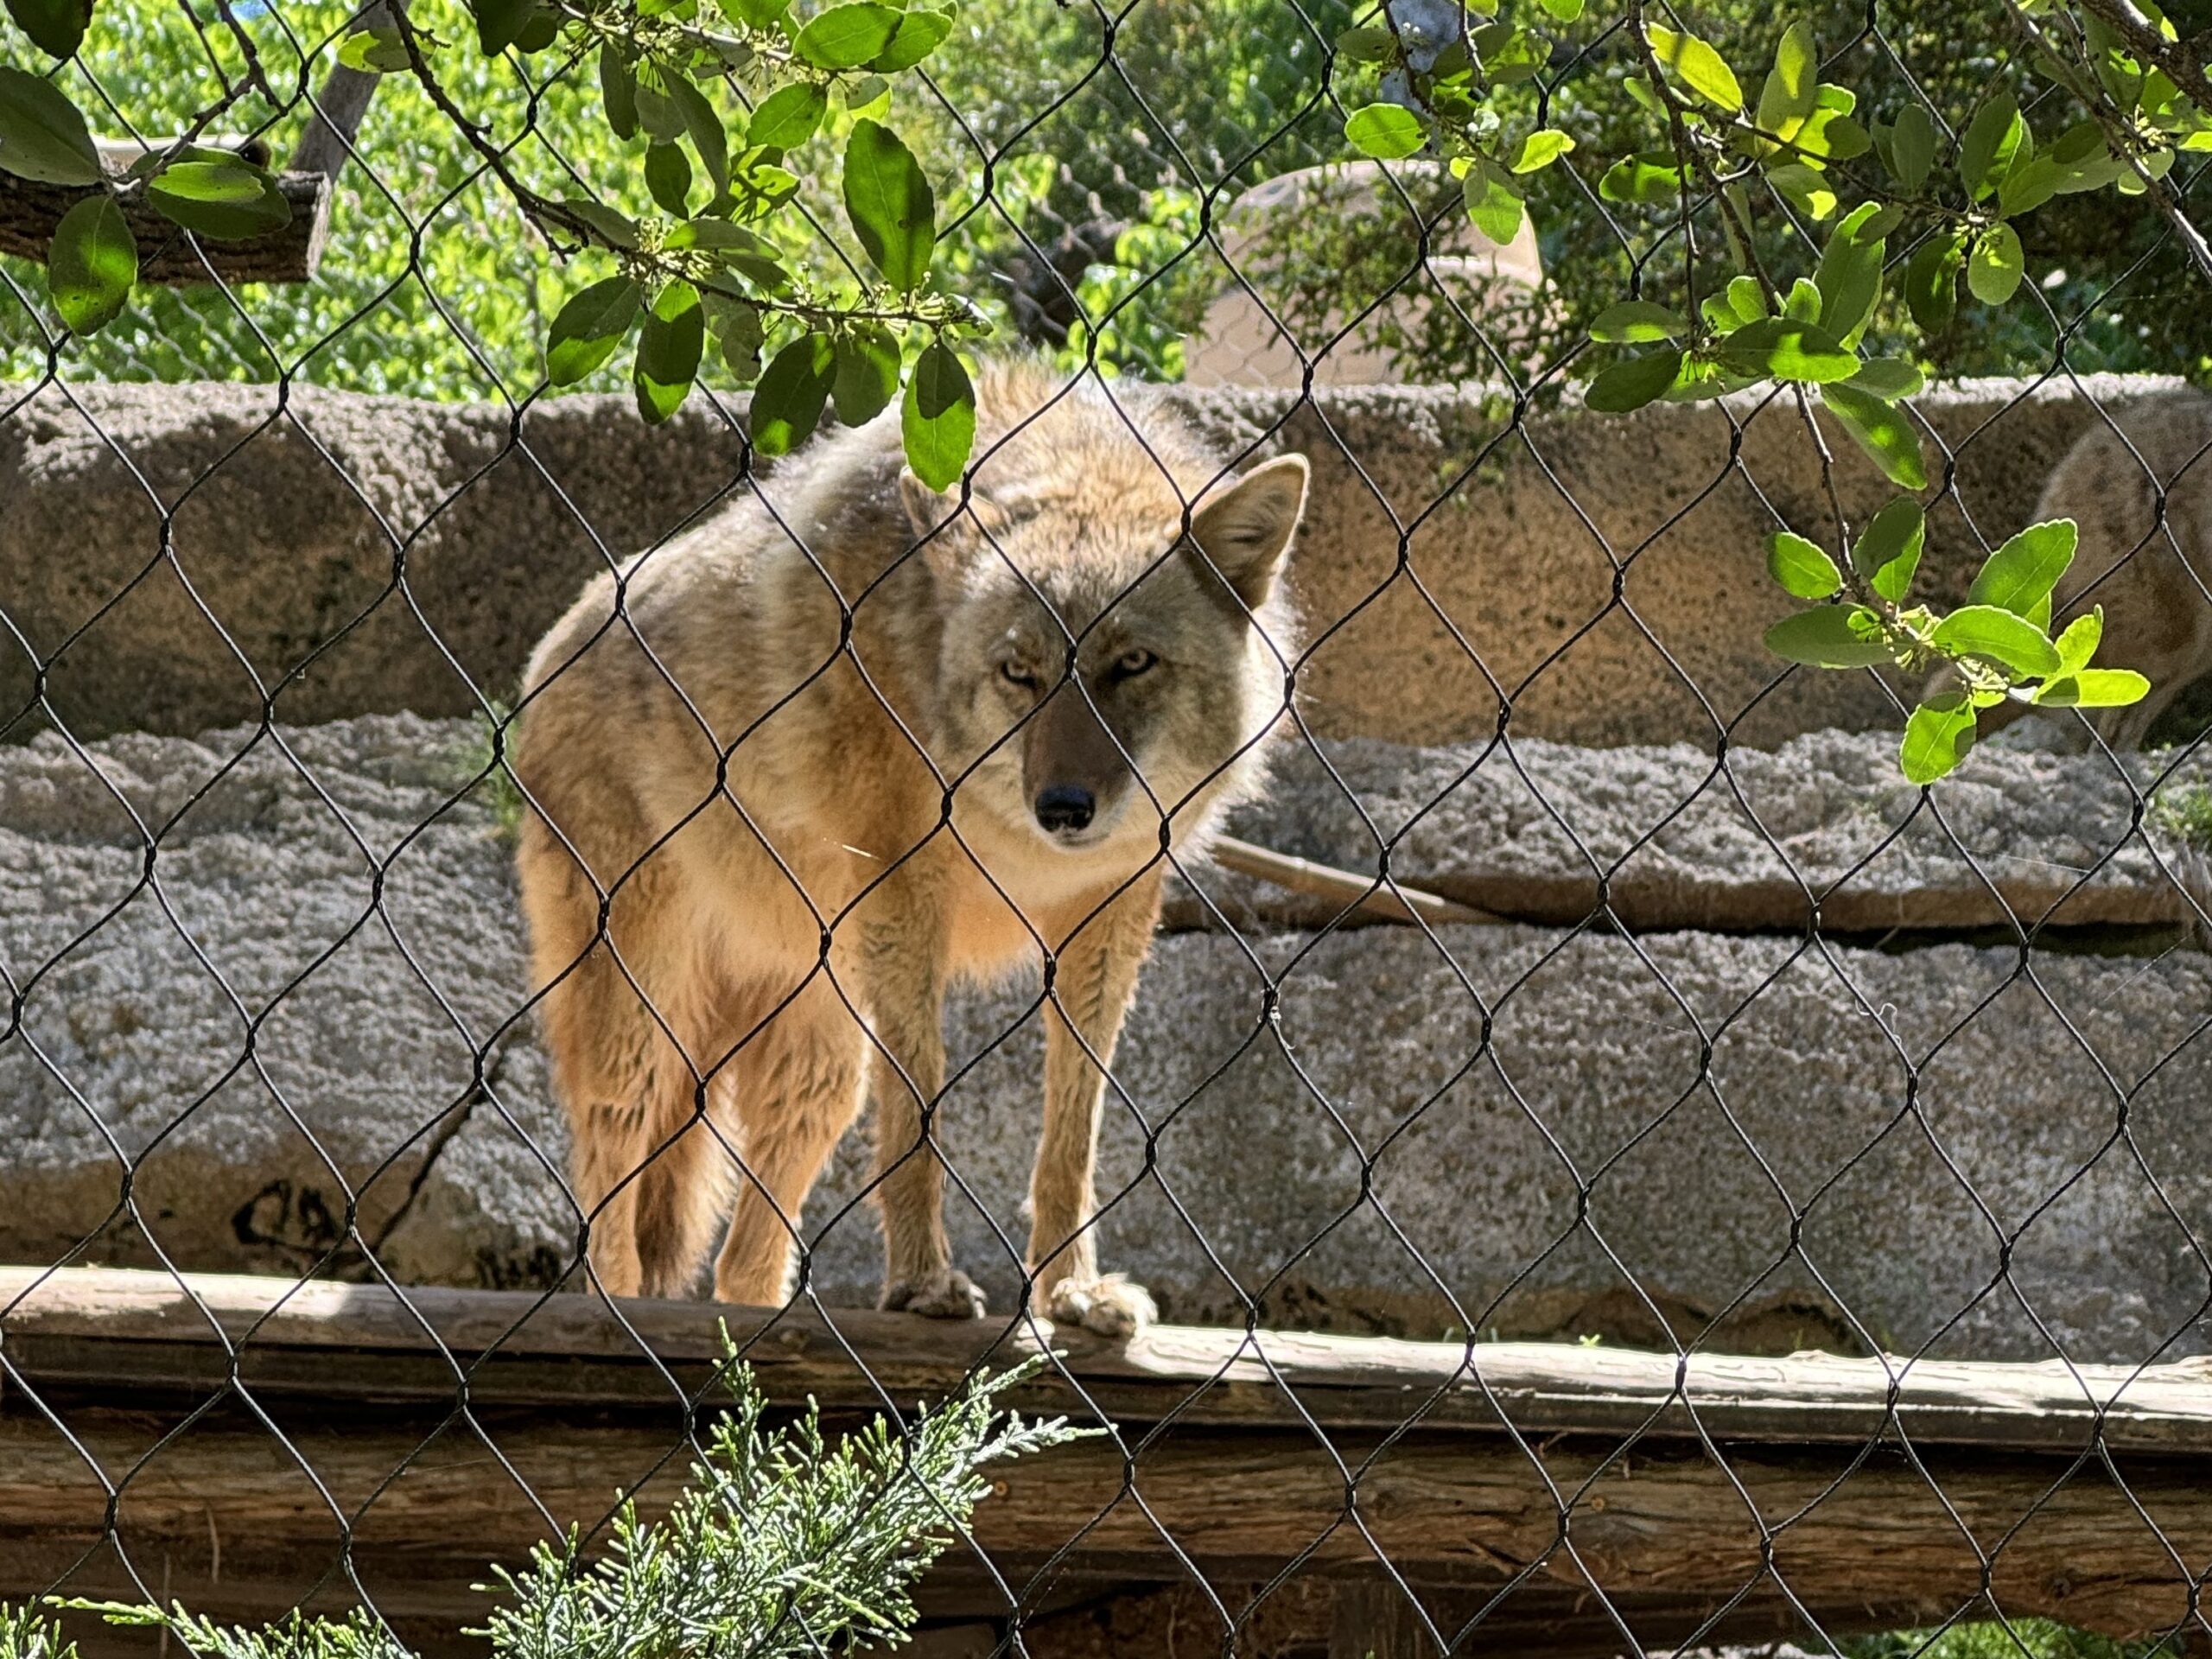 A coyote at the Fort Worth Zoo is photographed in the hours leading up to the April 8 total solar eclipse.